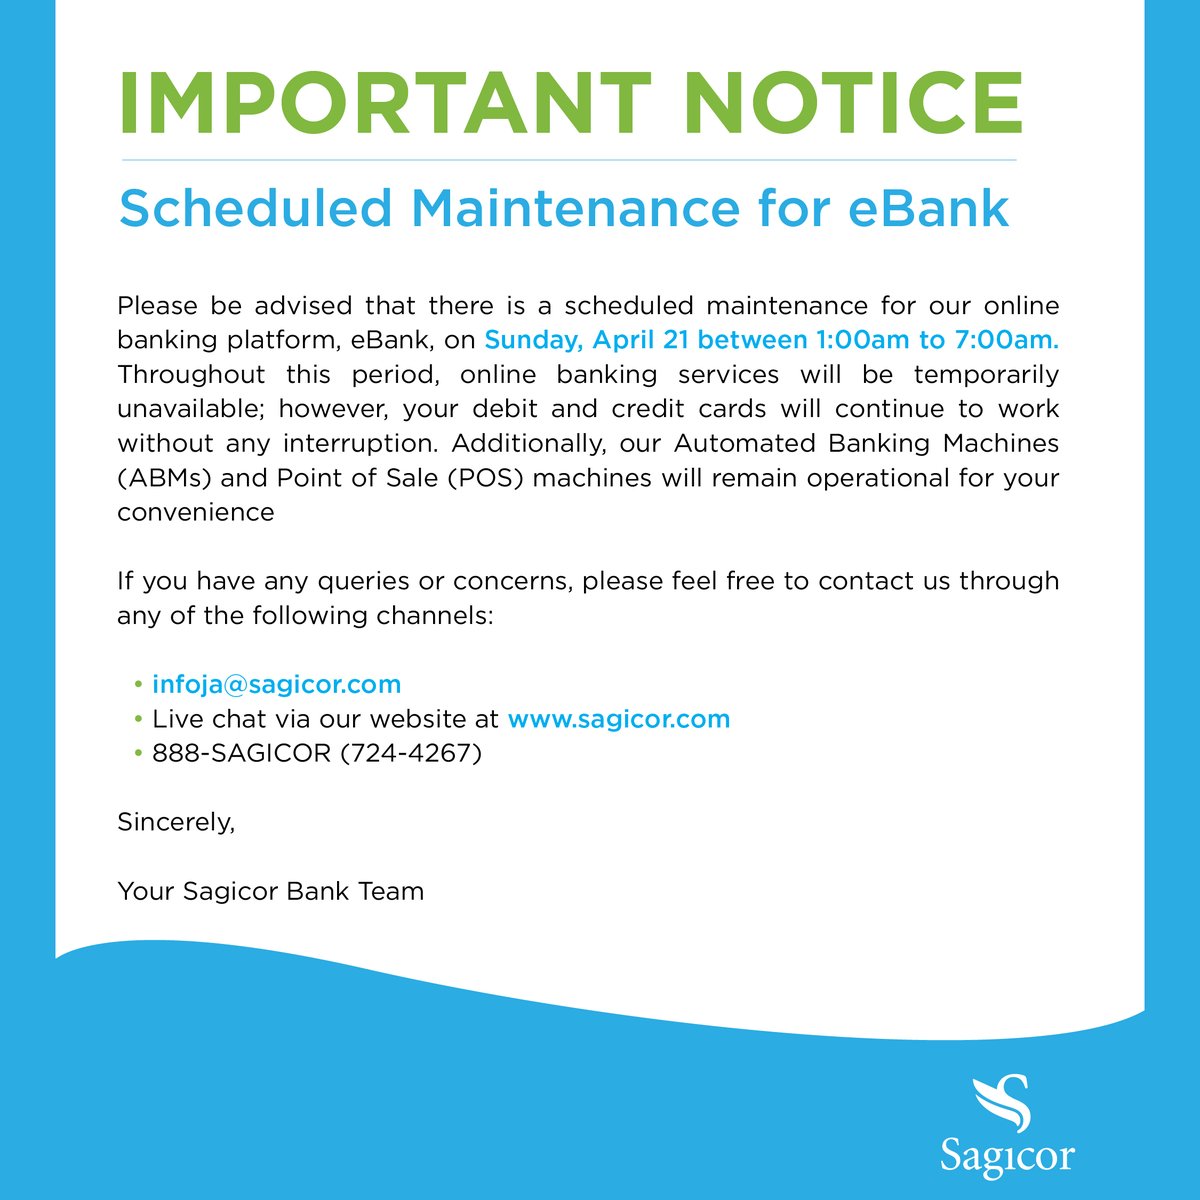 Please note the following important notice as it relates to the scheduled maintenance of our online banking platform, eBank. #SagicorJA #SagicorBank #SagicoreBank